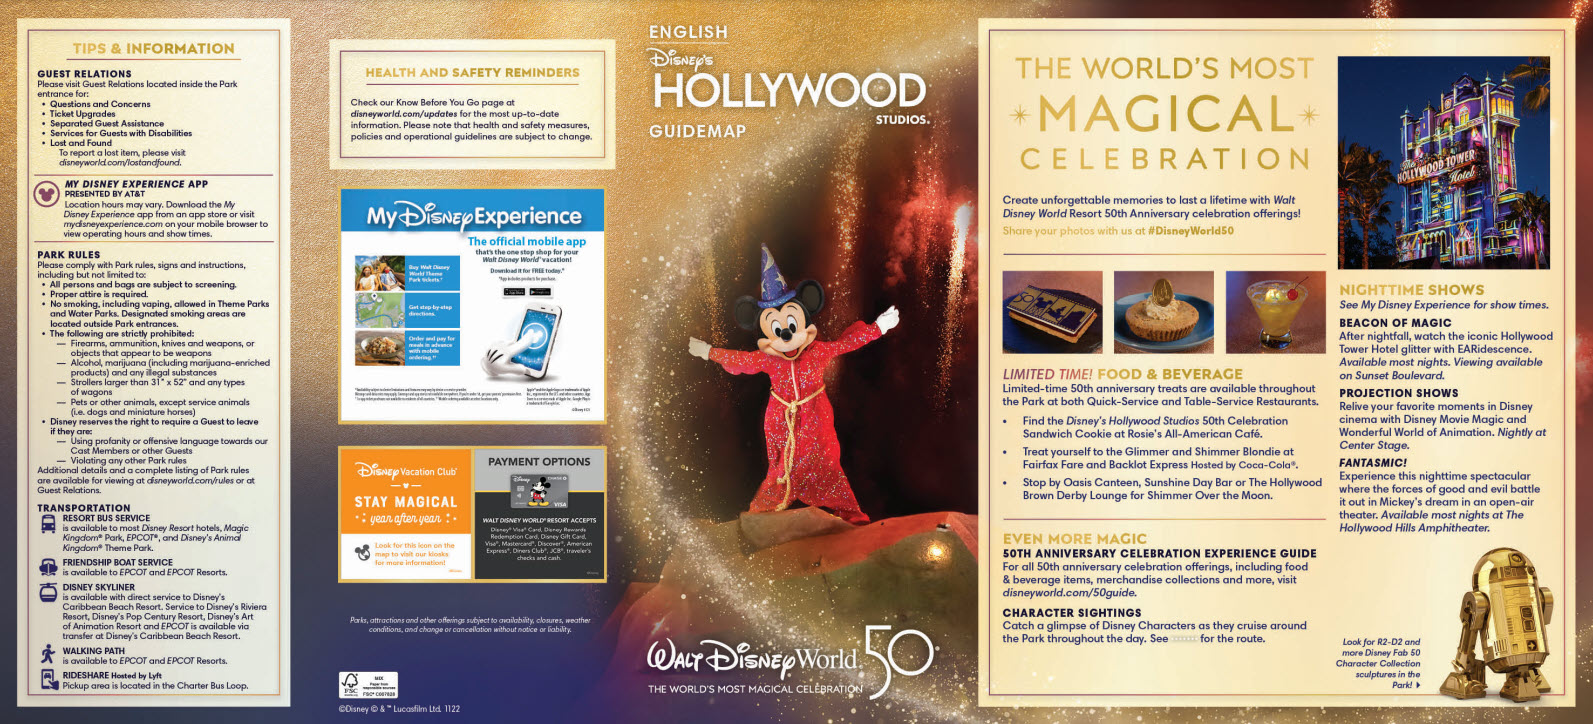 A Ride Chicken's Guide to Disney's Hollywood Studios Attractions